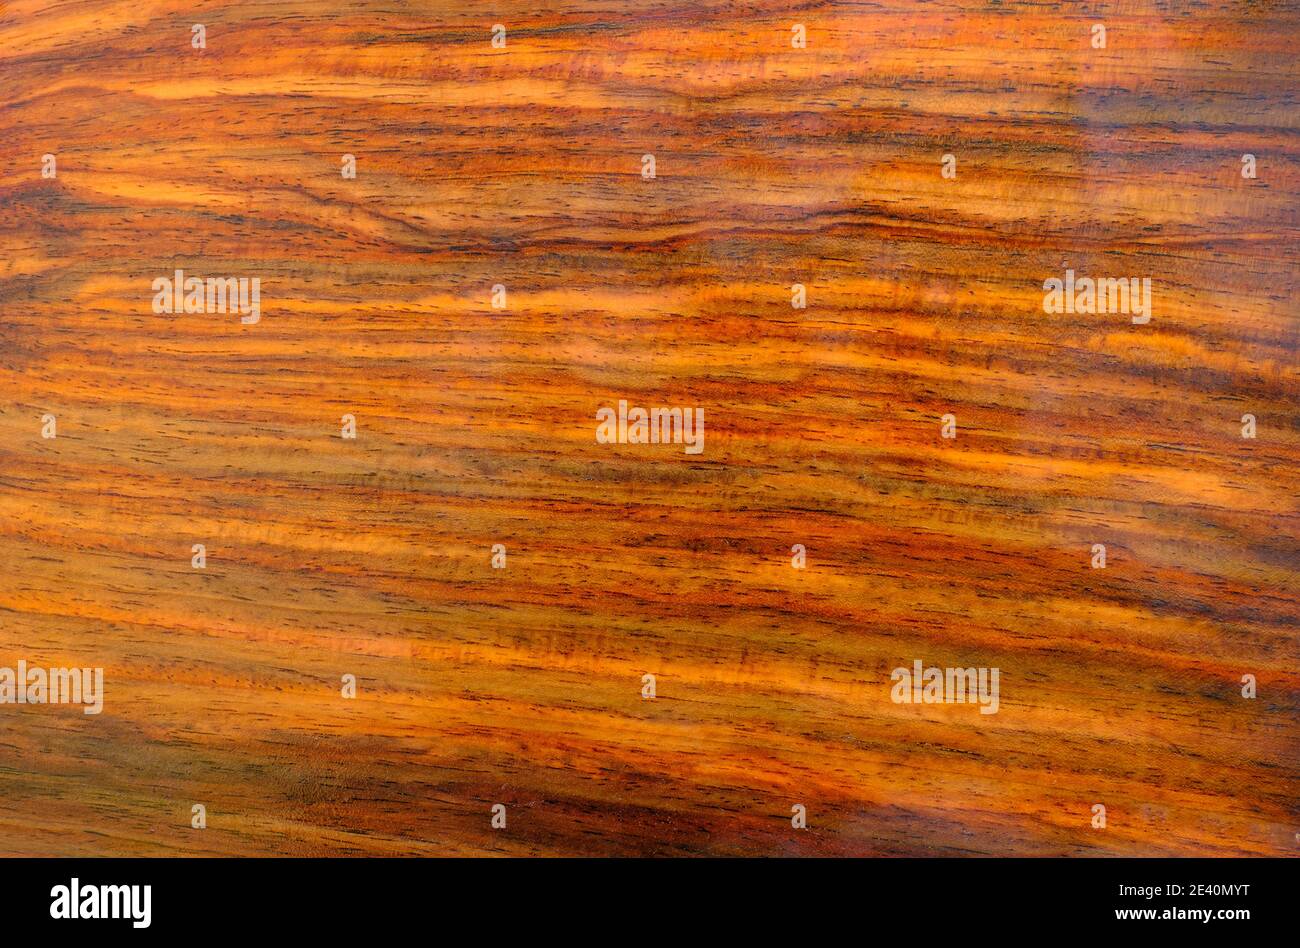 Siamese rosewood wood texture background surface with natural pattern Stock Photo